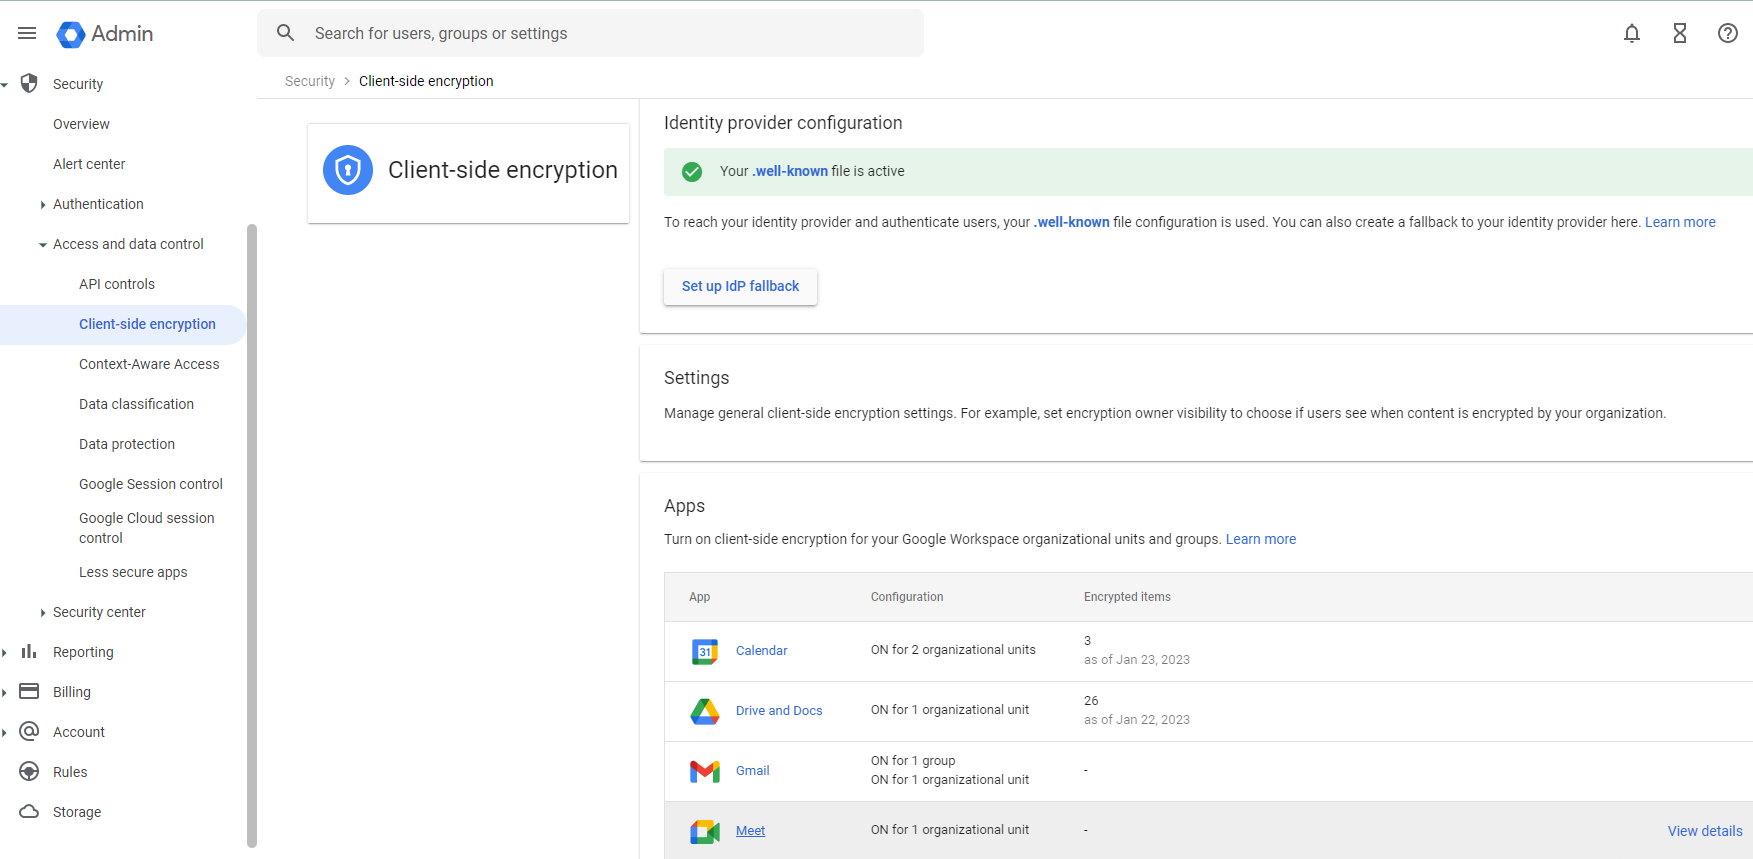 Activation window for encryption for Google Drive, Meet, Calendar